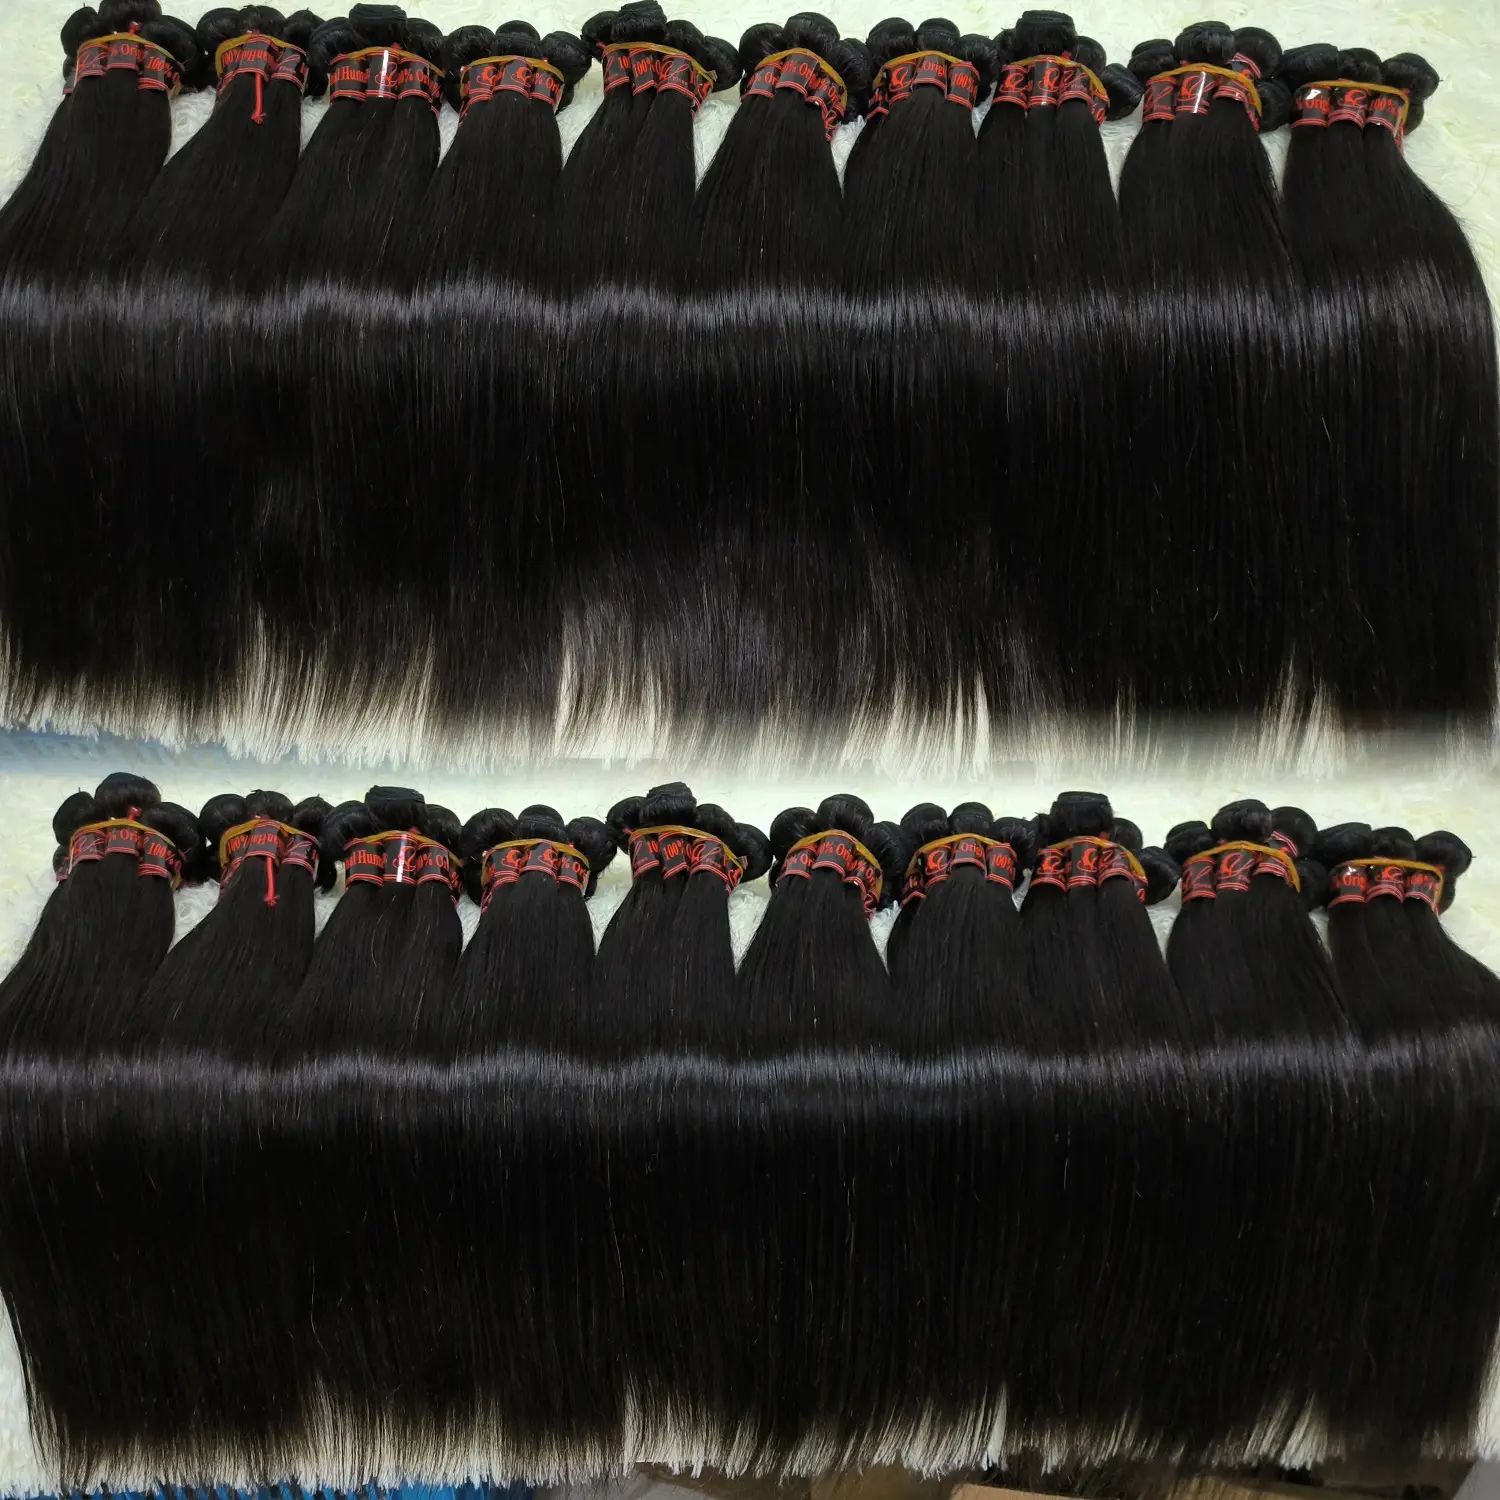 Letsfly Cheap 18inch Silky Straight Body Wave Hair Extensions Wholesale Natural Hair Brazilian Remy Hair Bundles Fast Shipping